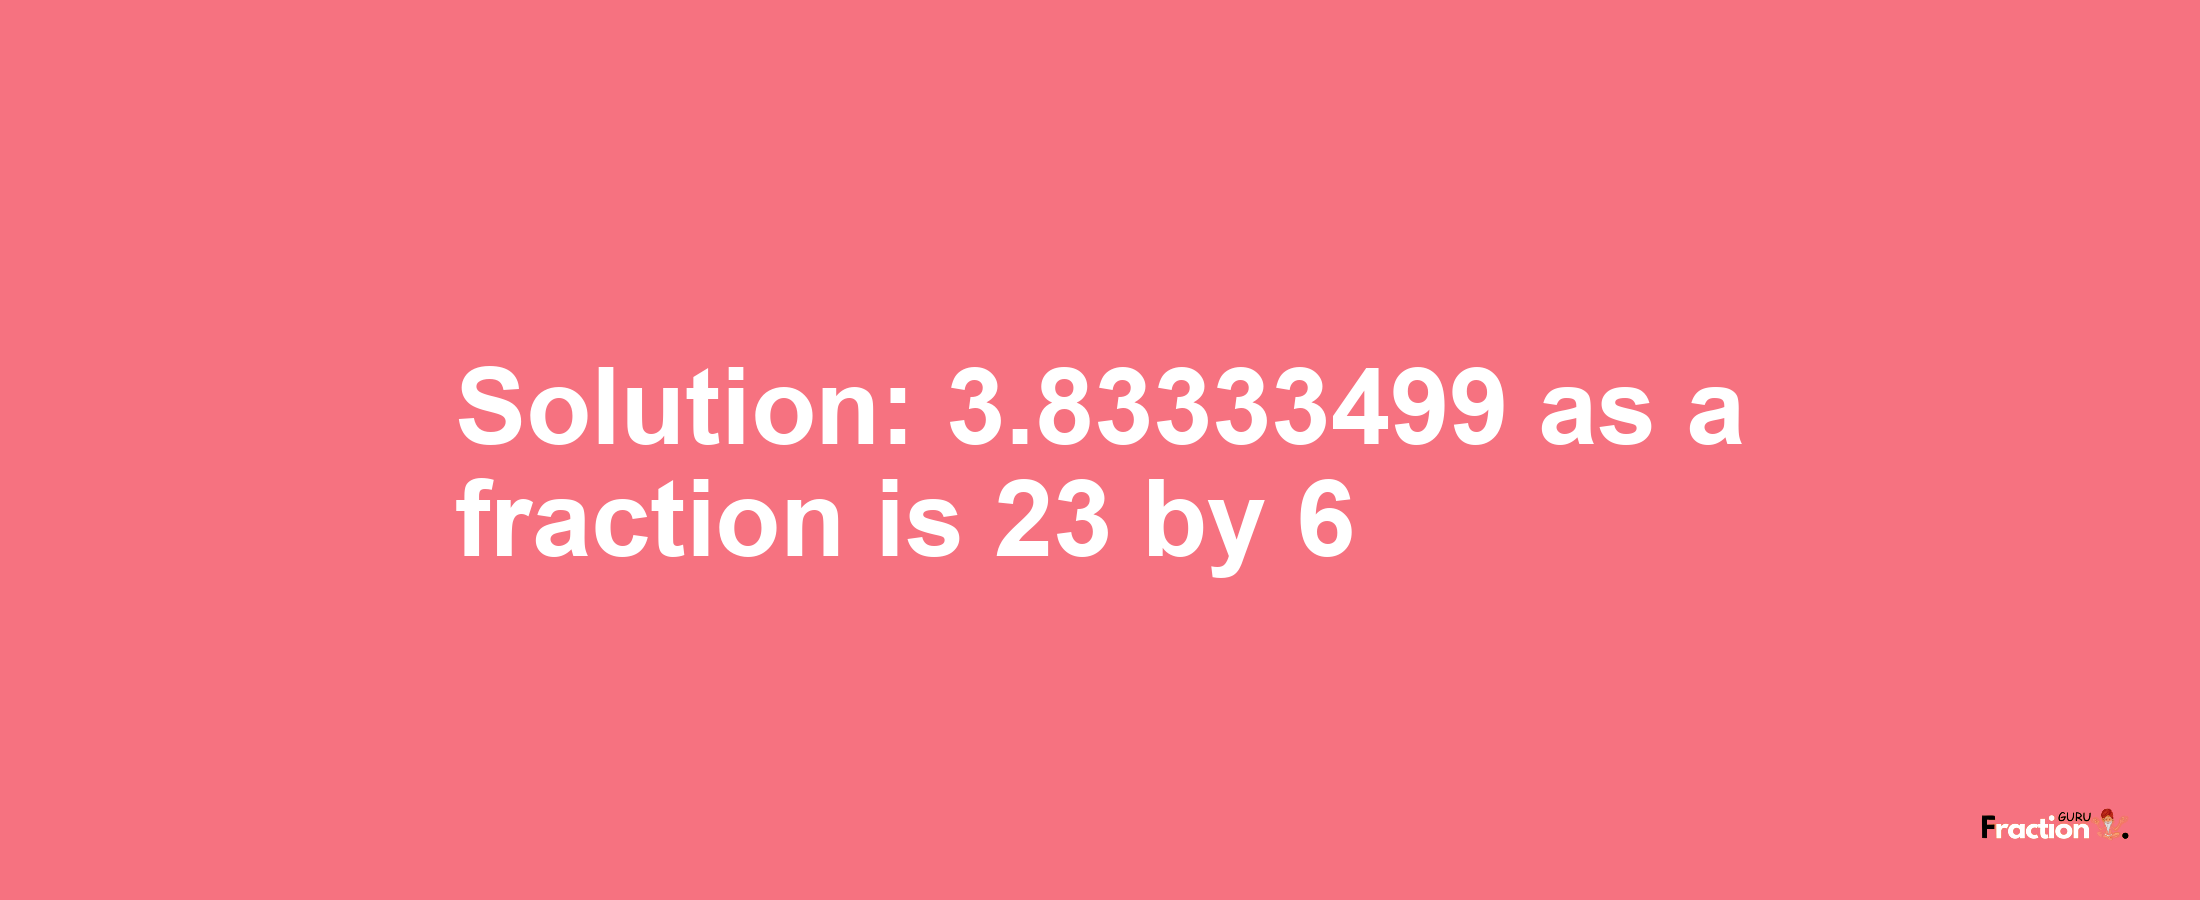 Solution:3.83333499 as a fraction is 23/6